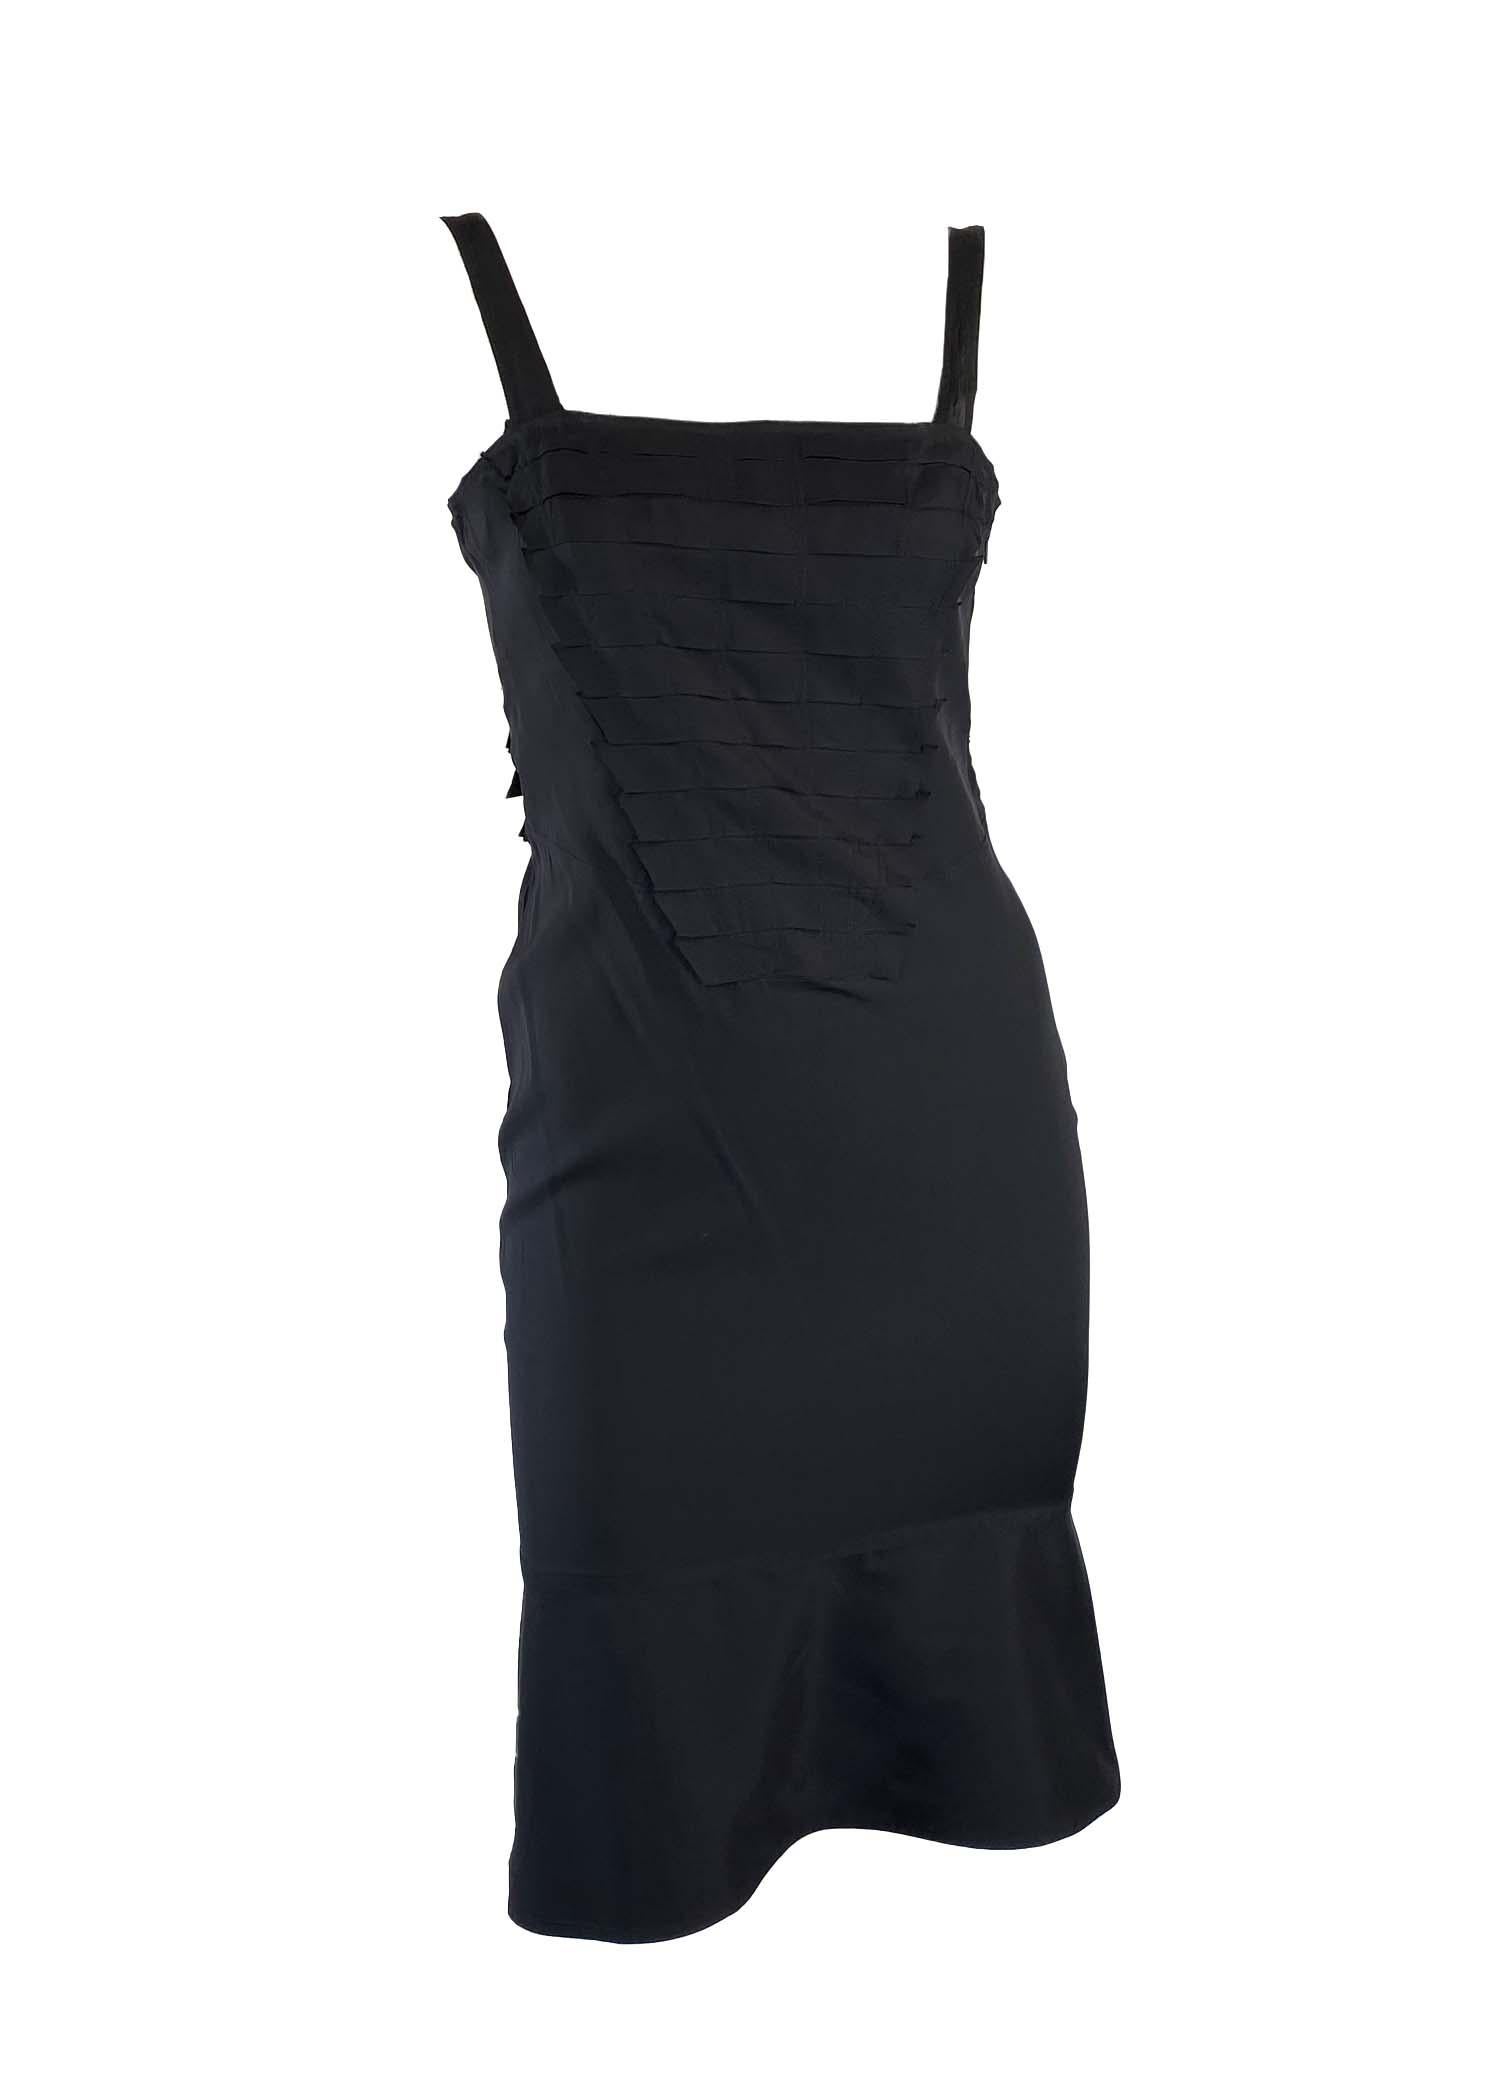 S/S 2004 Gucci by Tom Ford Black Ribbon Appliqué Sleeveless Stretch Silk Dress For Sale 2